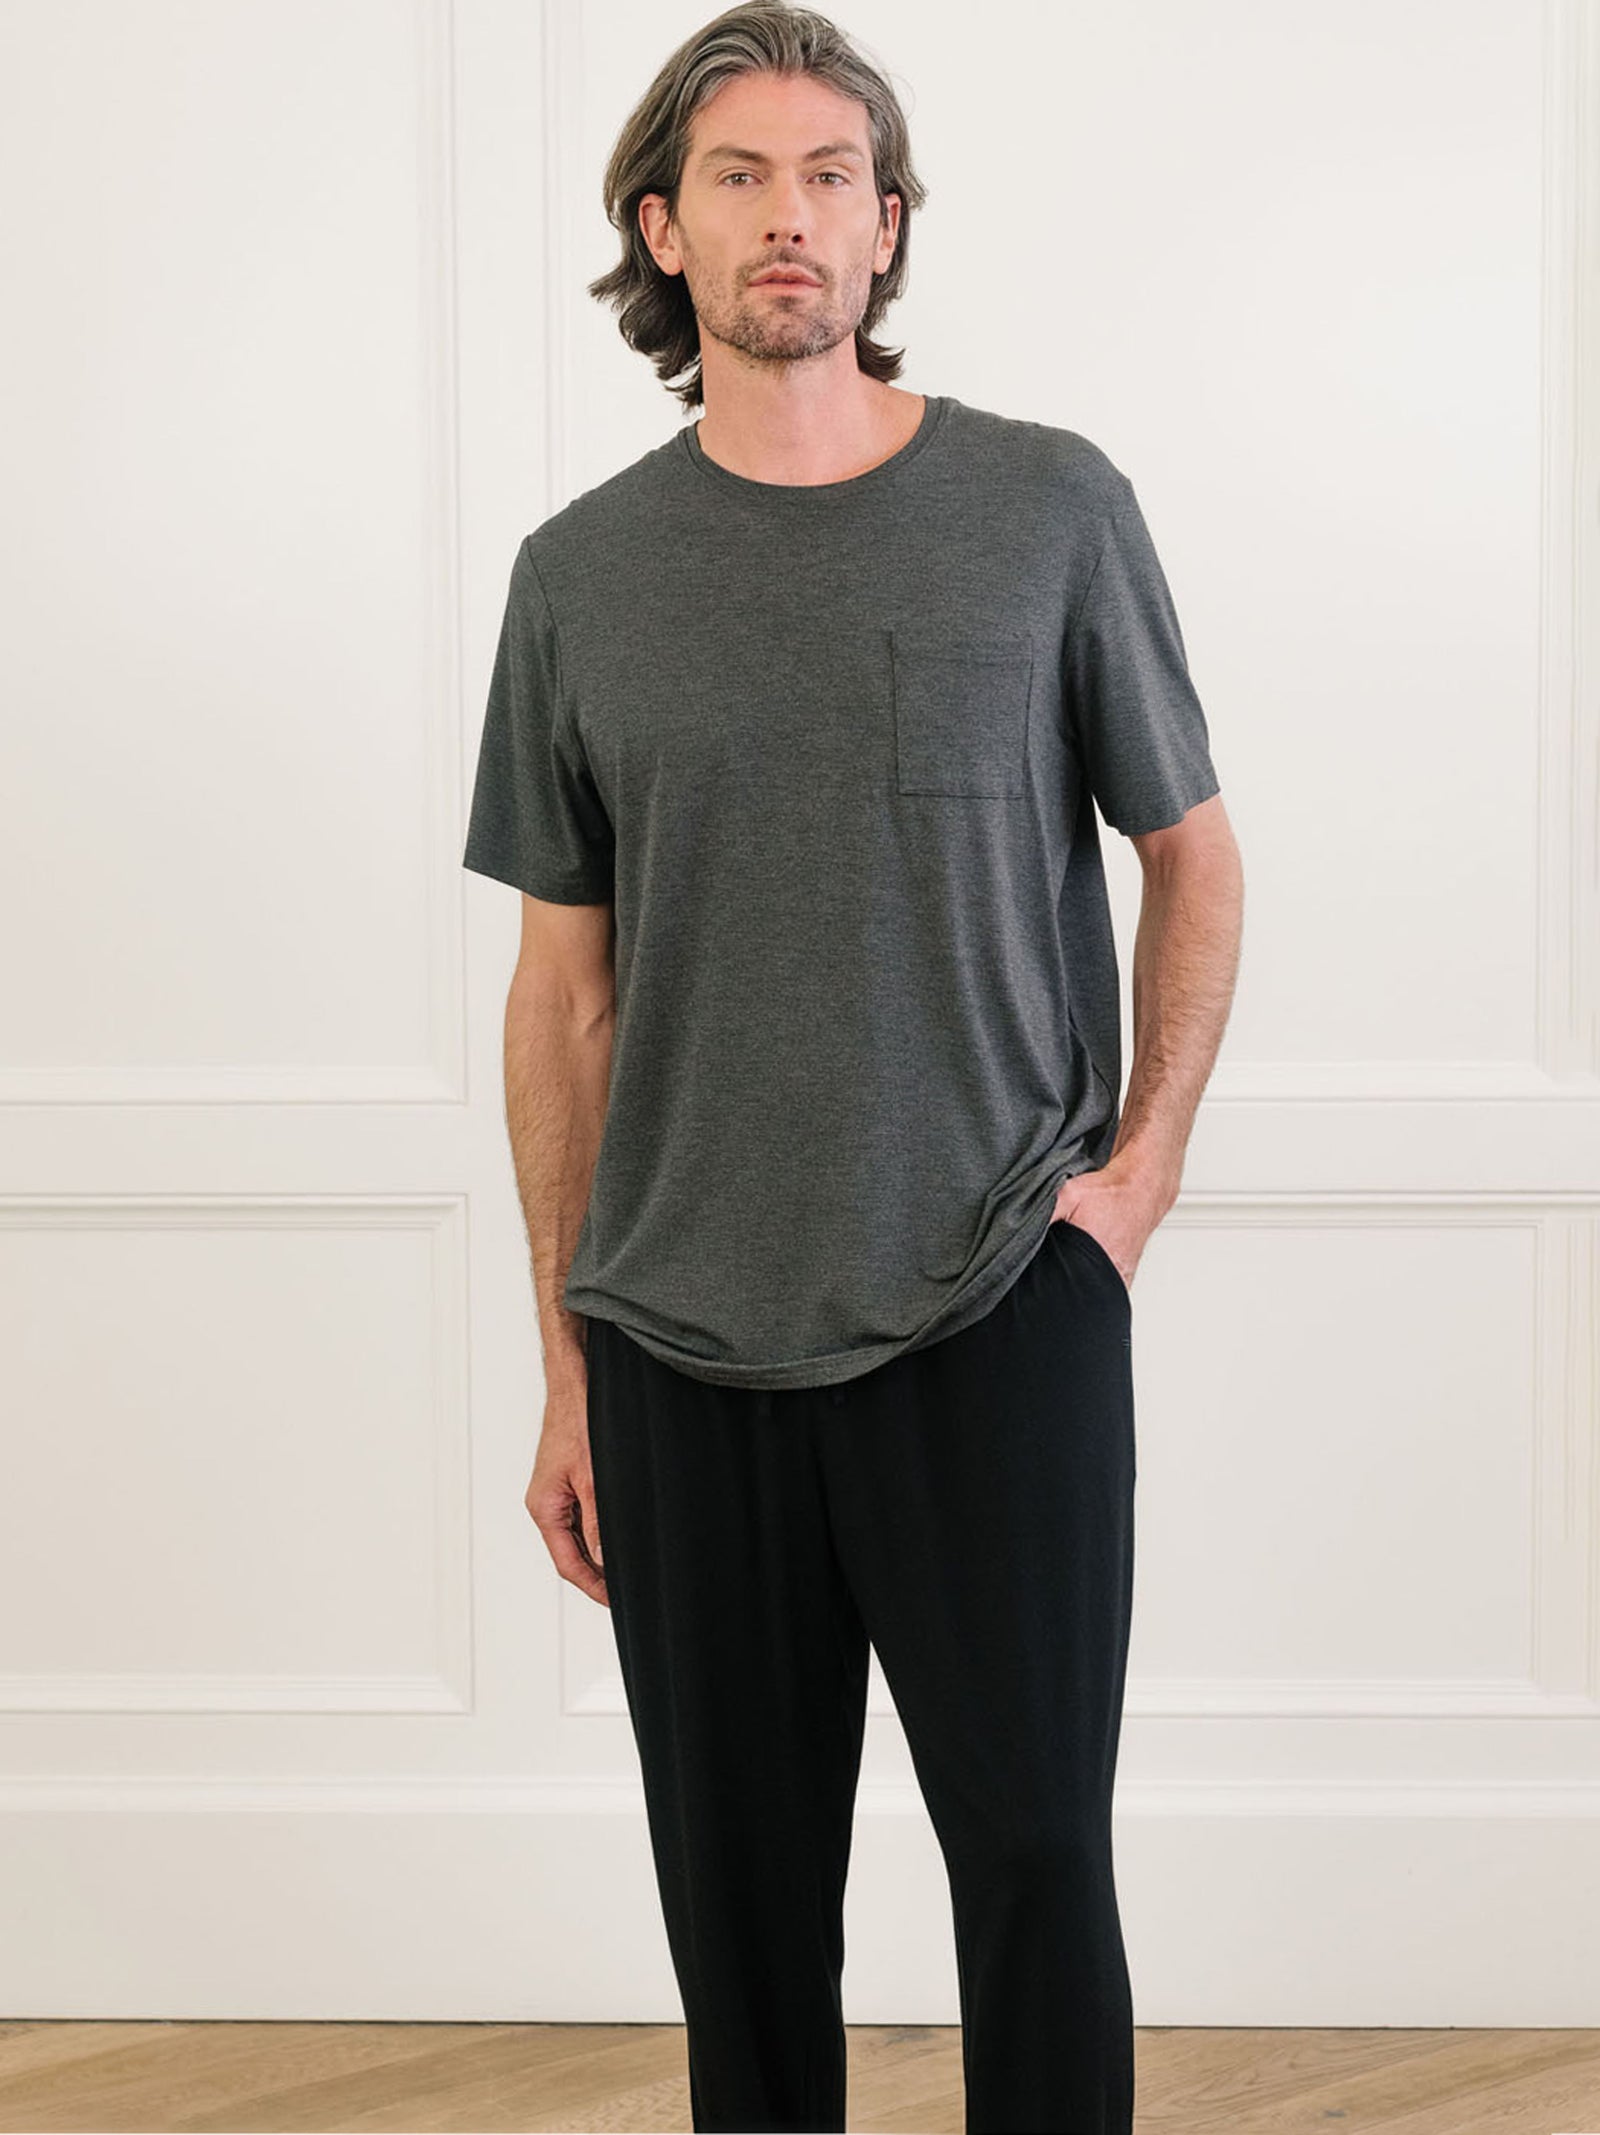 Charcoal Men's Stretch-Knit Bamboo Lounge Tee. A man is wearing the lounge tee in a well lit home.